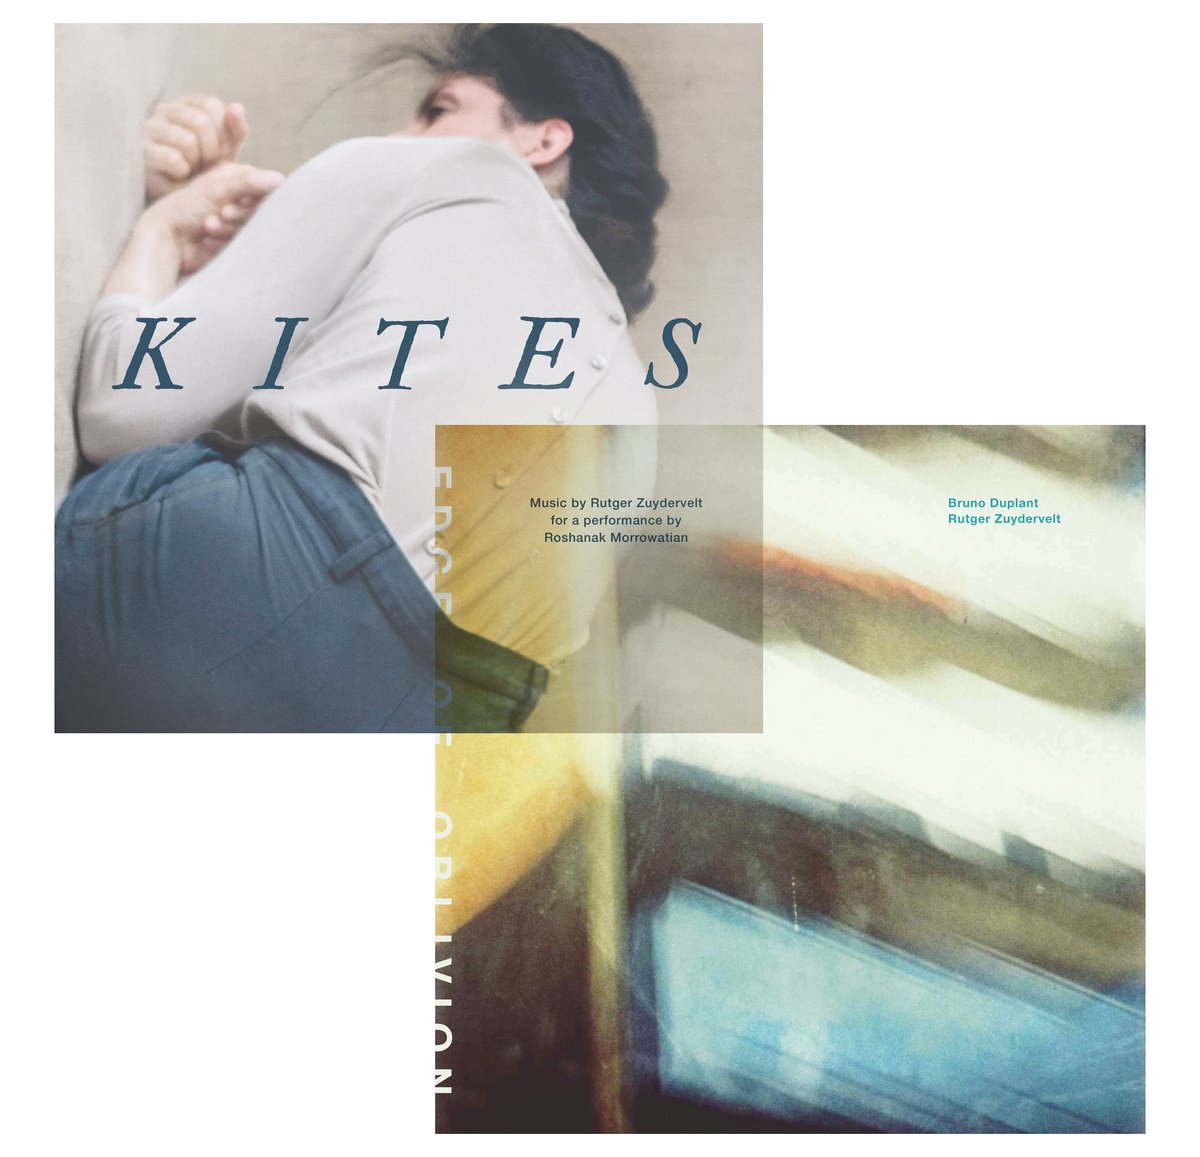 Kites (music for a performance by Roshanak Morrowatian) and Edge of Oblivion (with Bruno Duplant) are out now! Stream the complete albums on my @Bandcamp (download and cd available too), or on your platform of choice. linktr.ee/machinefabriek